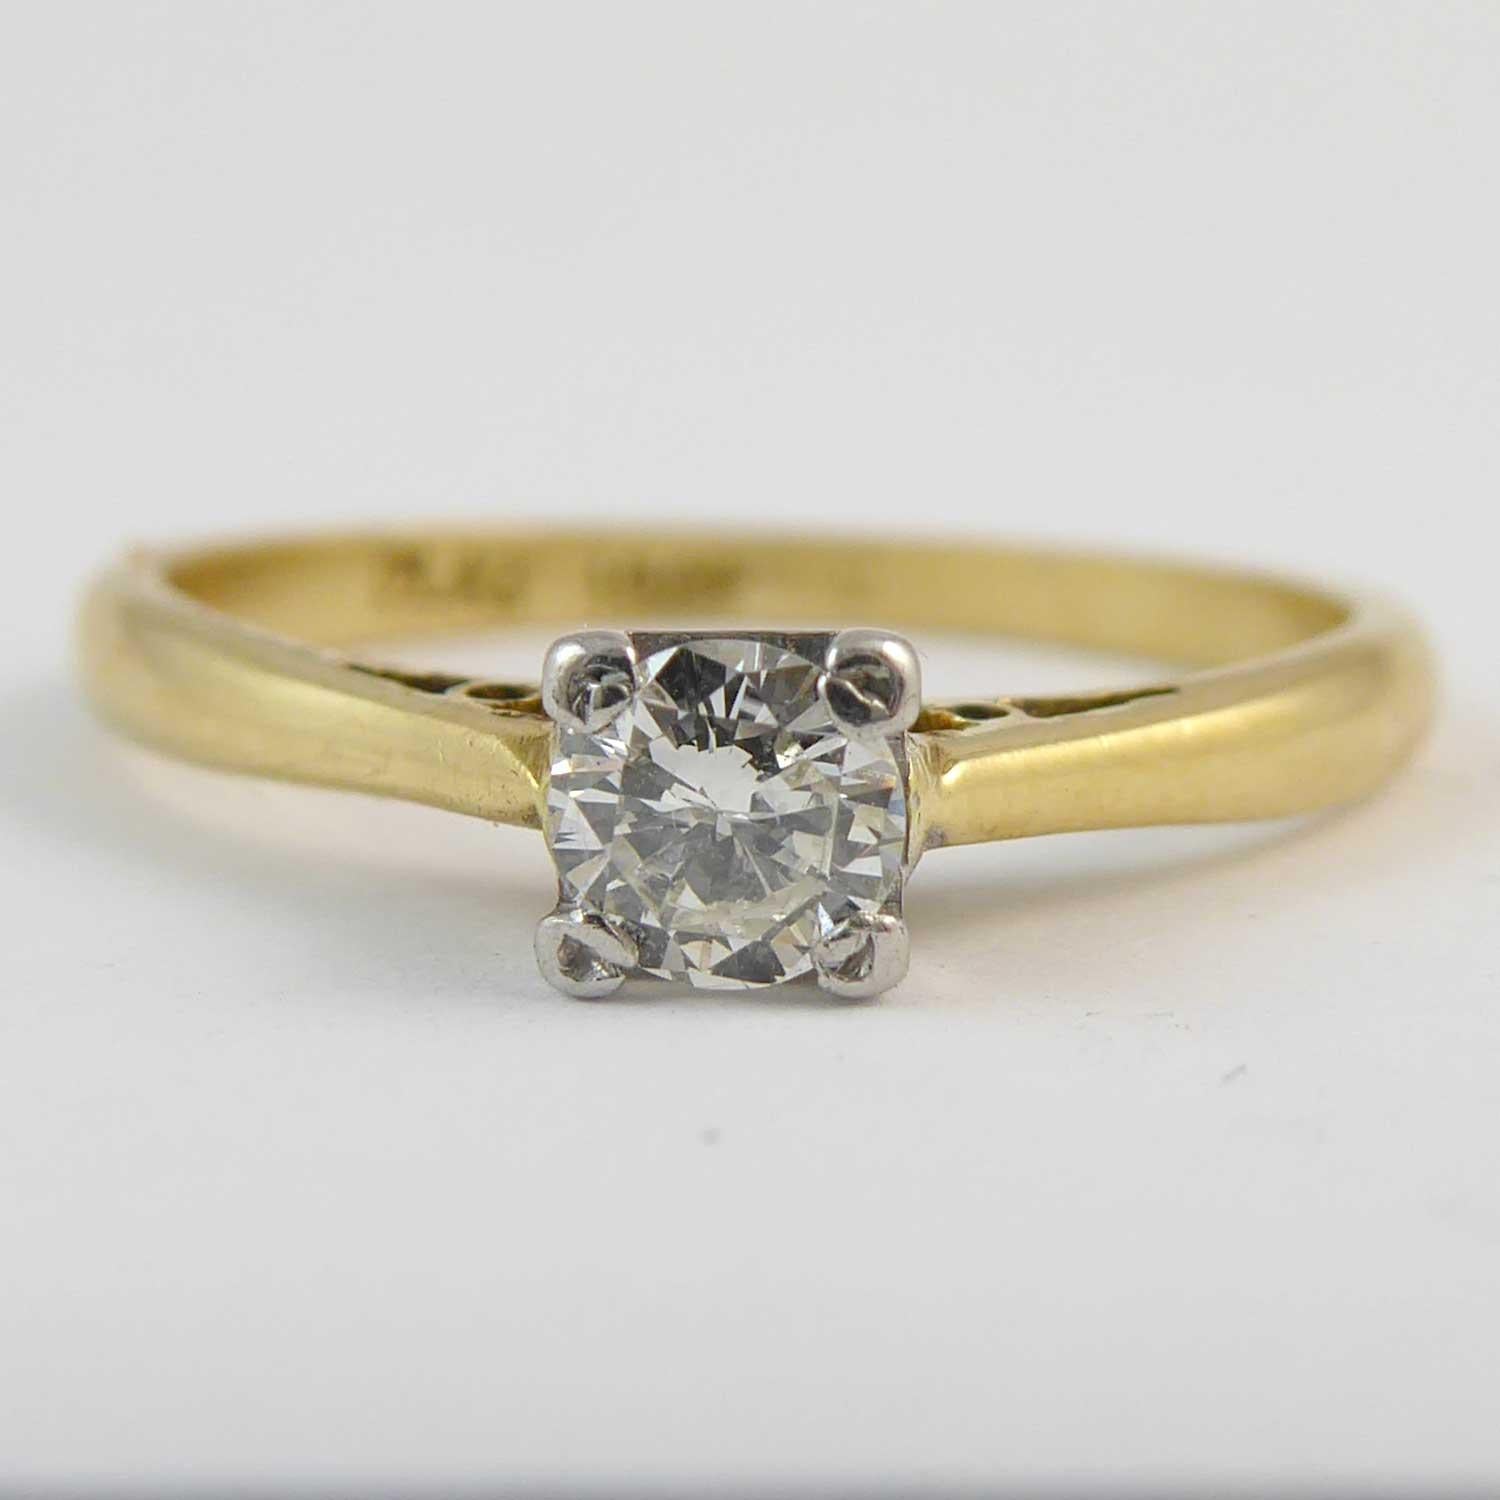 A dainty solitaire diamond ring just perfect for the petite hand.  Comprising a round brilliant cut diamond measuring approx. 4.0mm diameter set in four white rub-over claws creating a square appearance to a white square mount.  Yellow D shaped